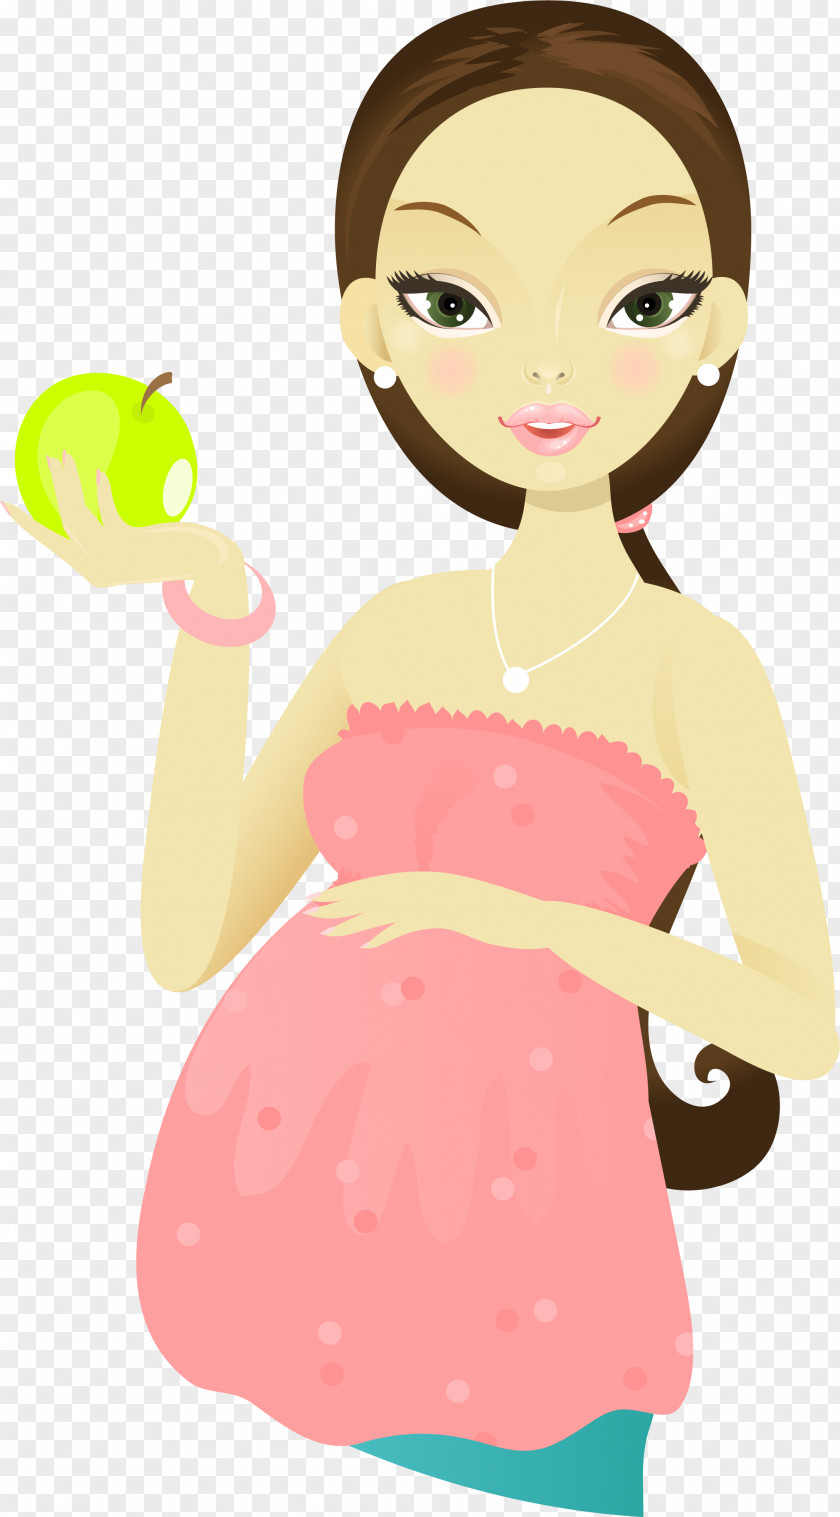 Pregnant Woman Holding Apple Pregnancy Cartoon Mother PNG